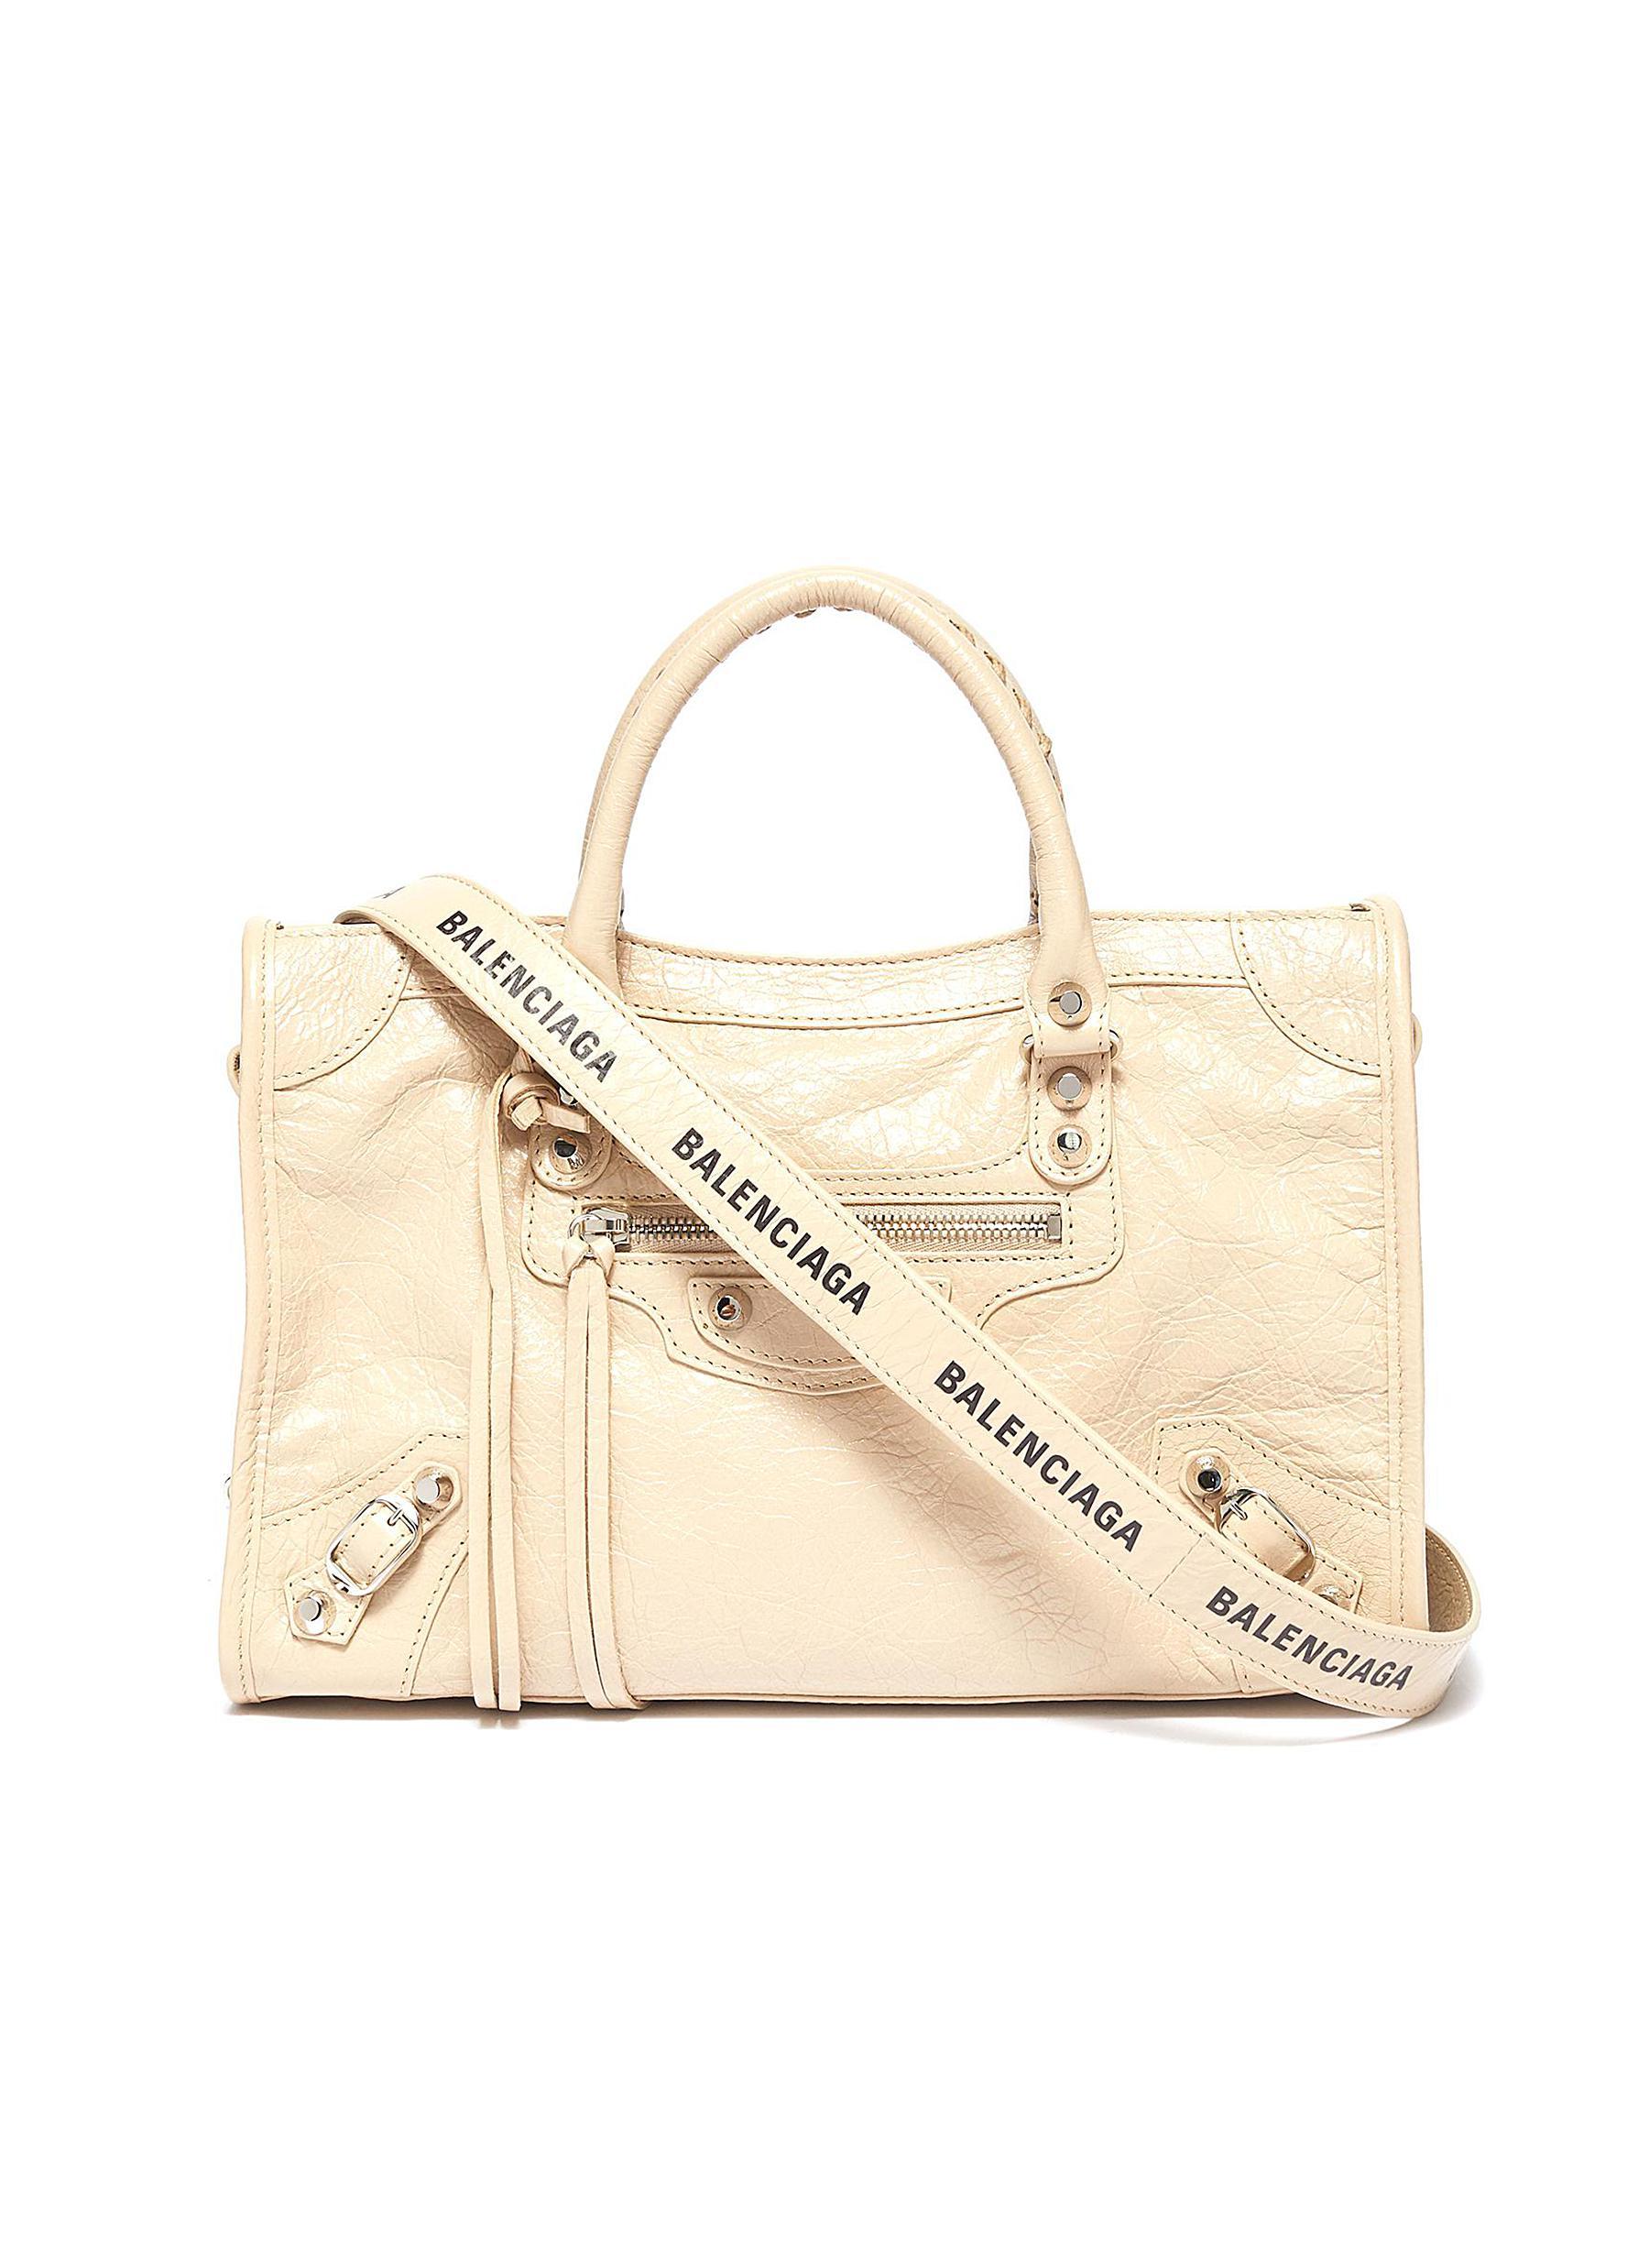 ITGIRL APPROVED THE STATEMENT BAG STRAP  colette by colette hayman